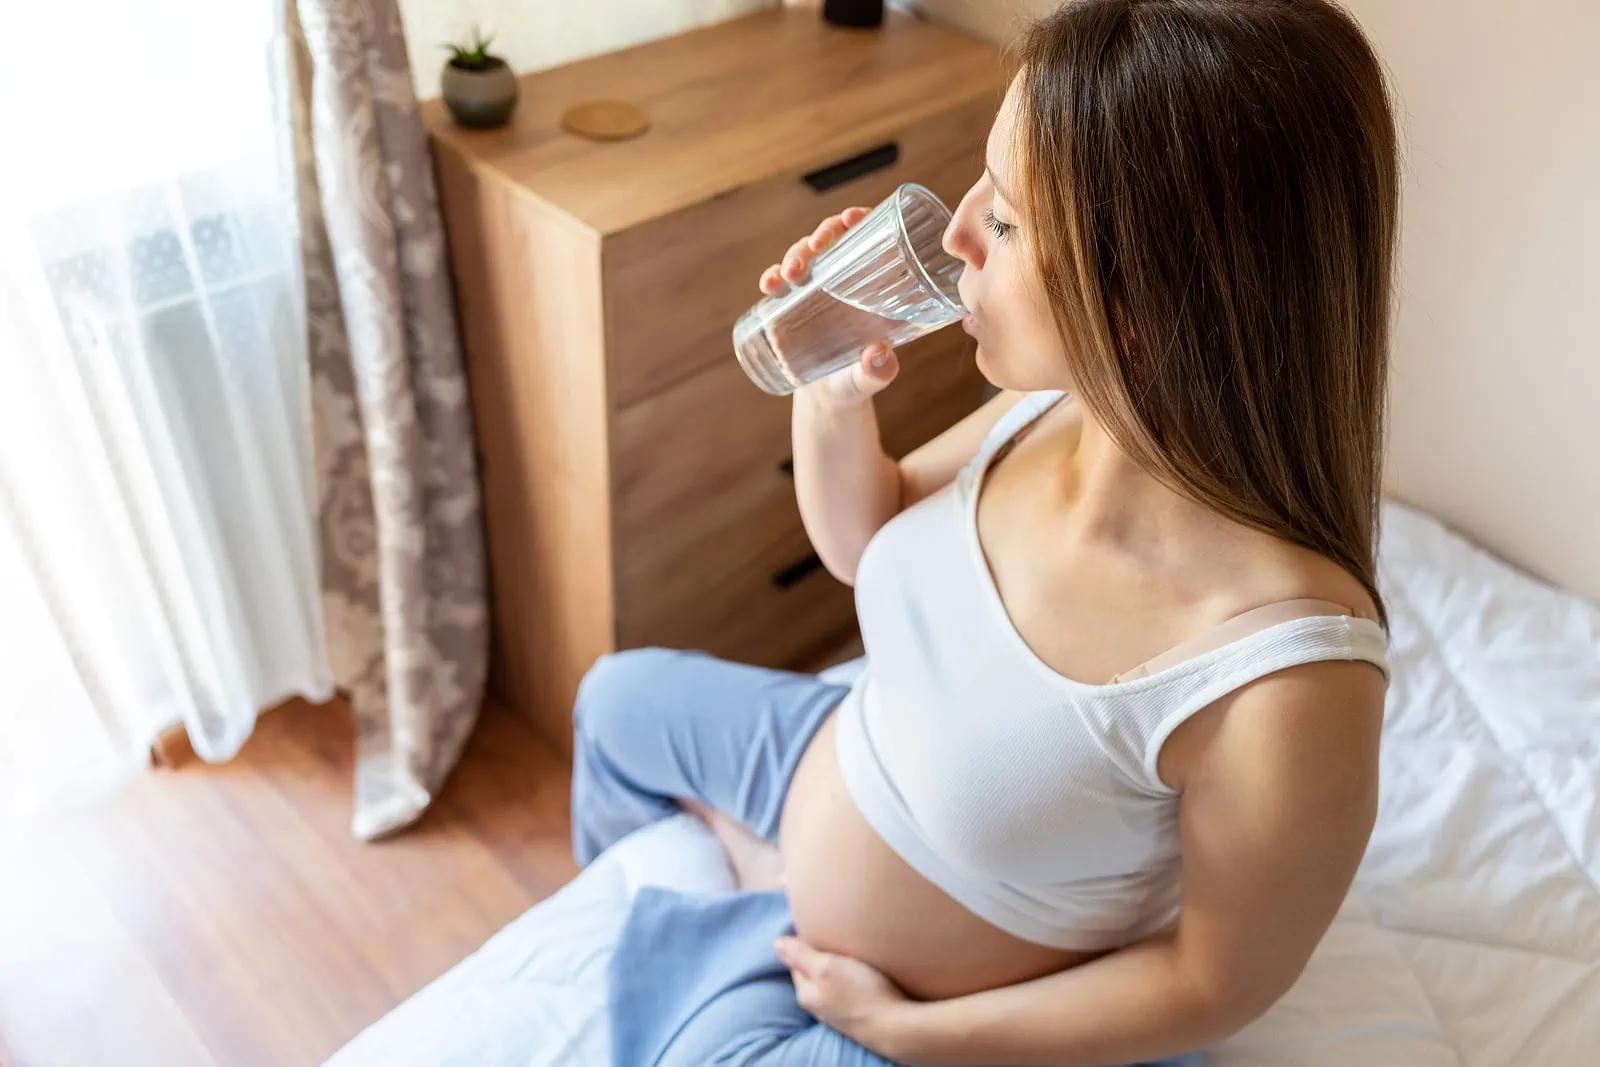 Effects of Arsenic in Drinking Water During Pregnancy